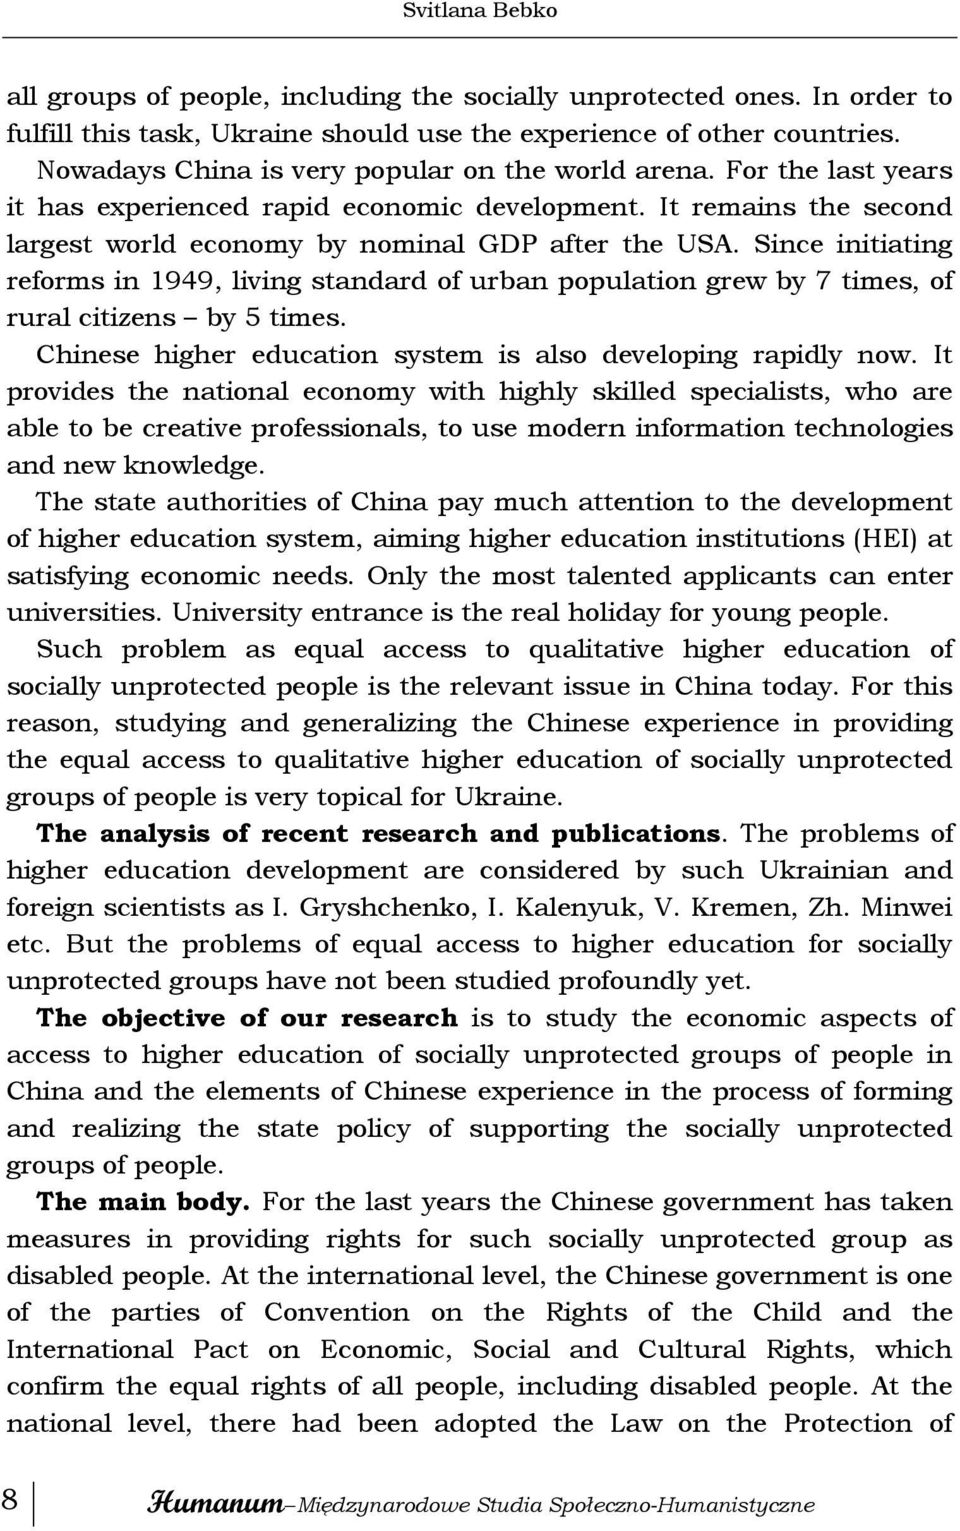 Since initiating reforms in 1949, living standard of urban population grew by 7 times, of rural citizens by 5 times. Chinese higher education system is also developing rapidly now.